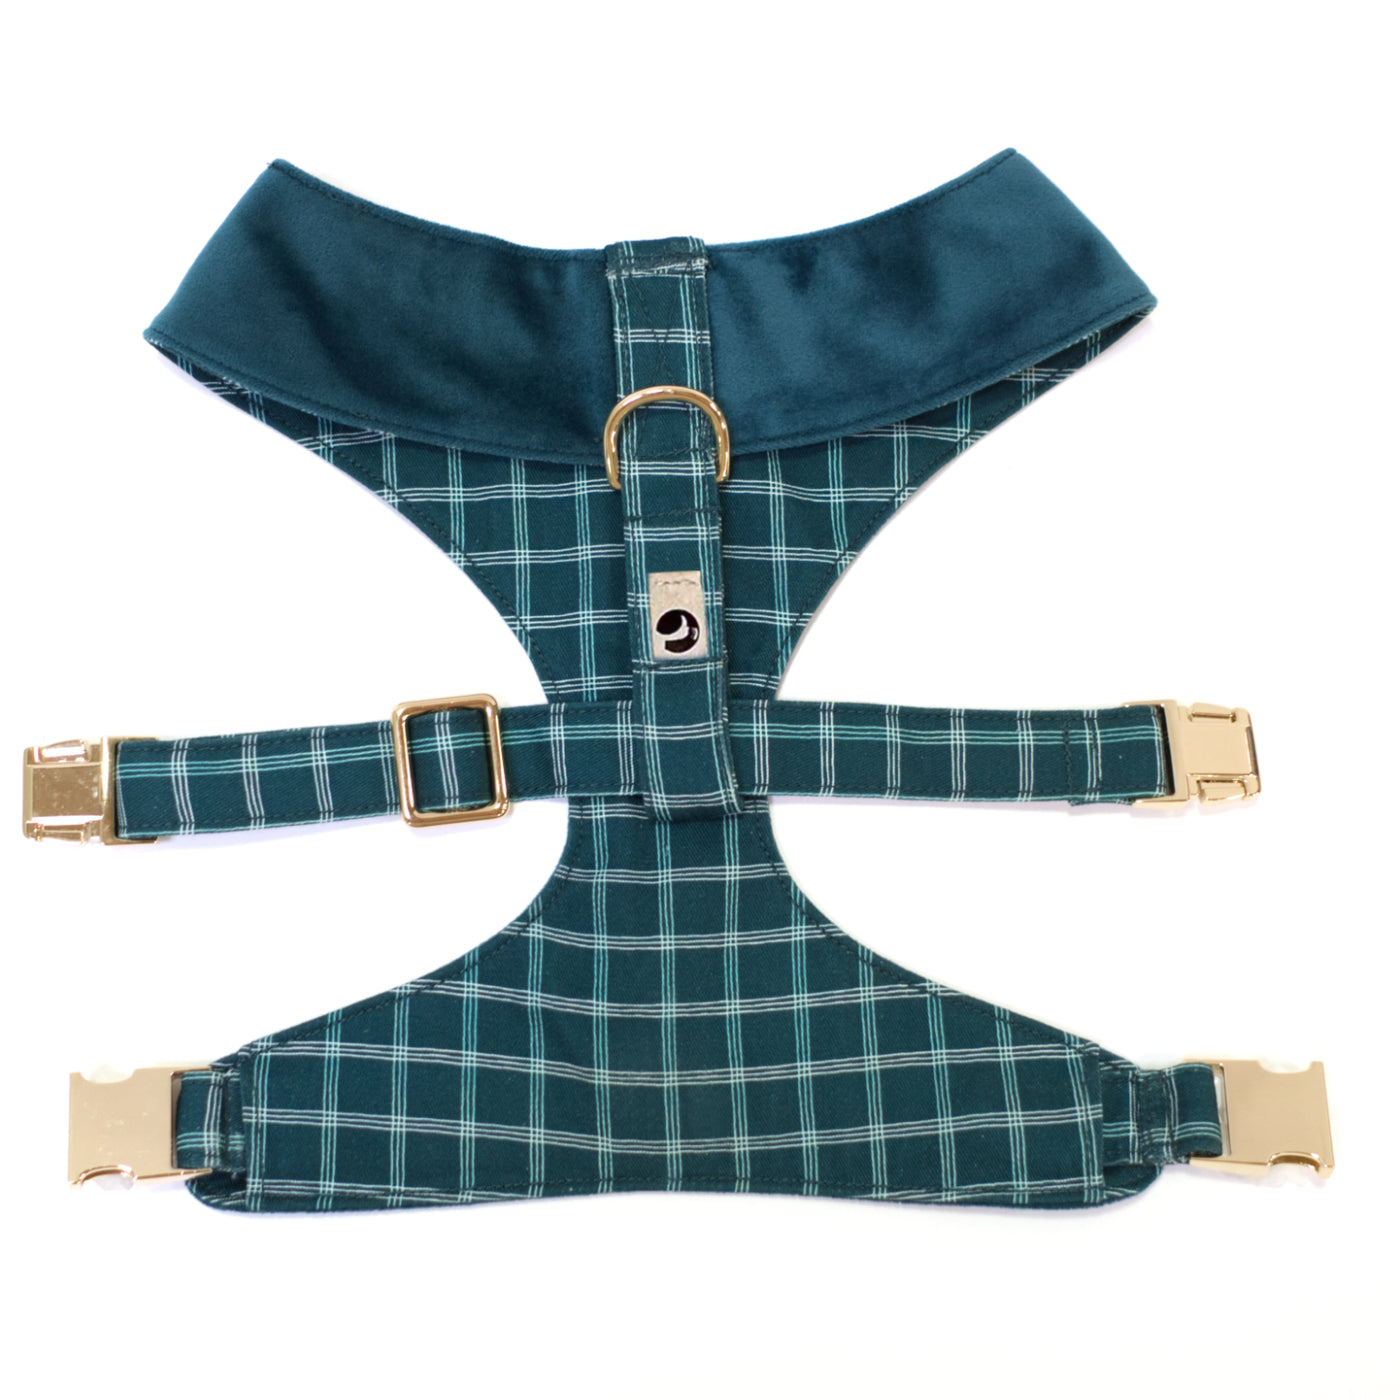 Dark teal velvet and windowpane plaid reversible dog harness with gold hardware shown from top/back